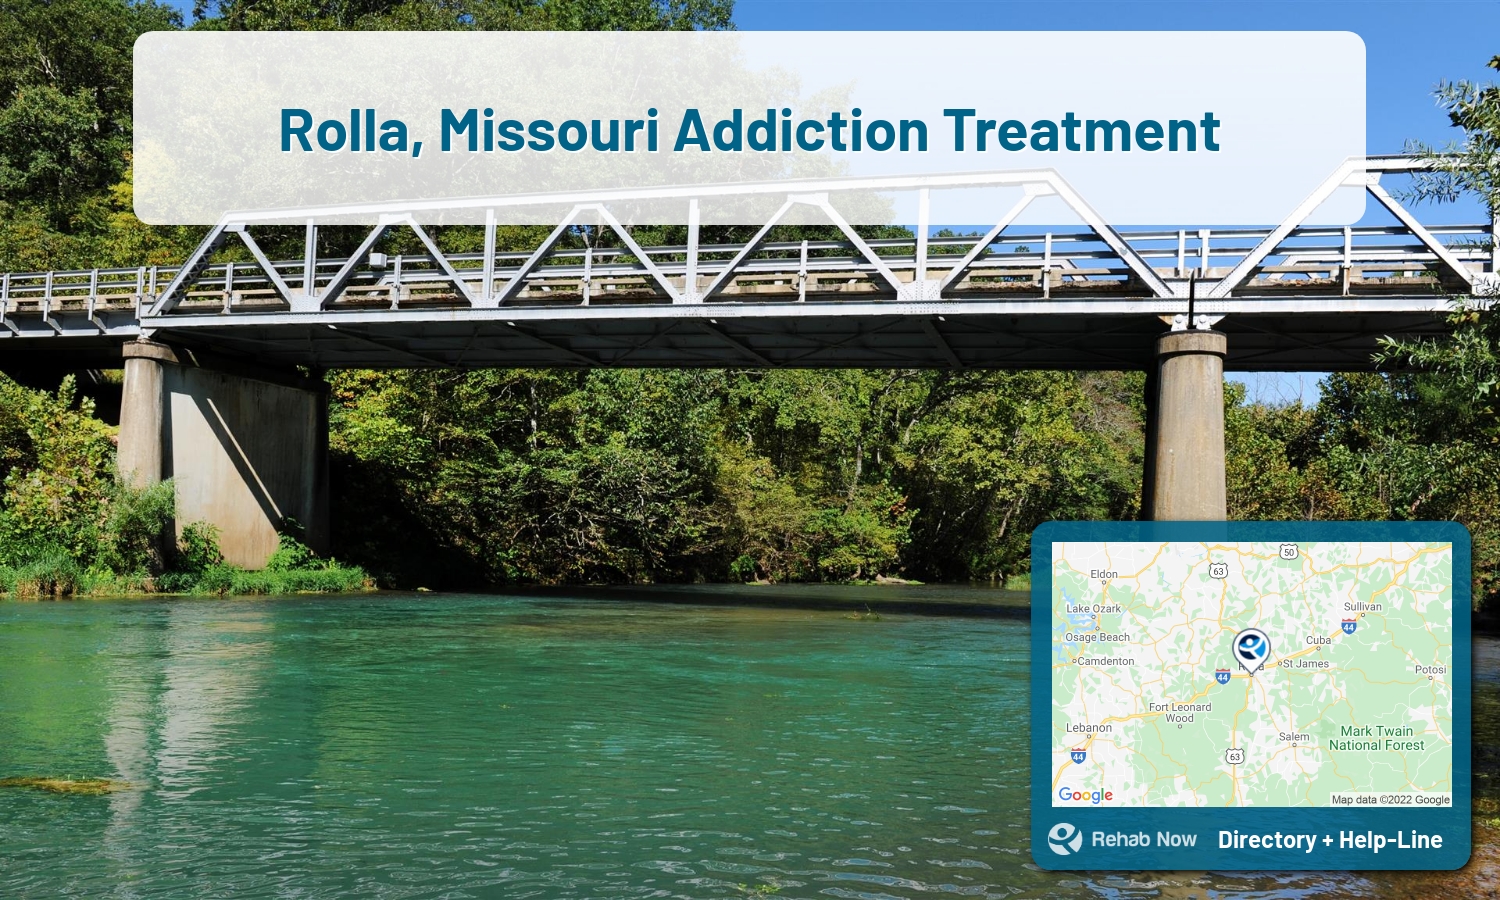 Let our expert counselors help find the best addiction treatment in Rolla, Missouri now with a free call to our hotline.